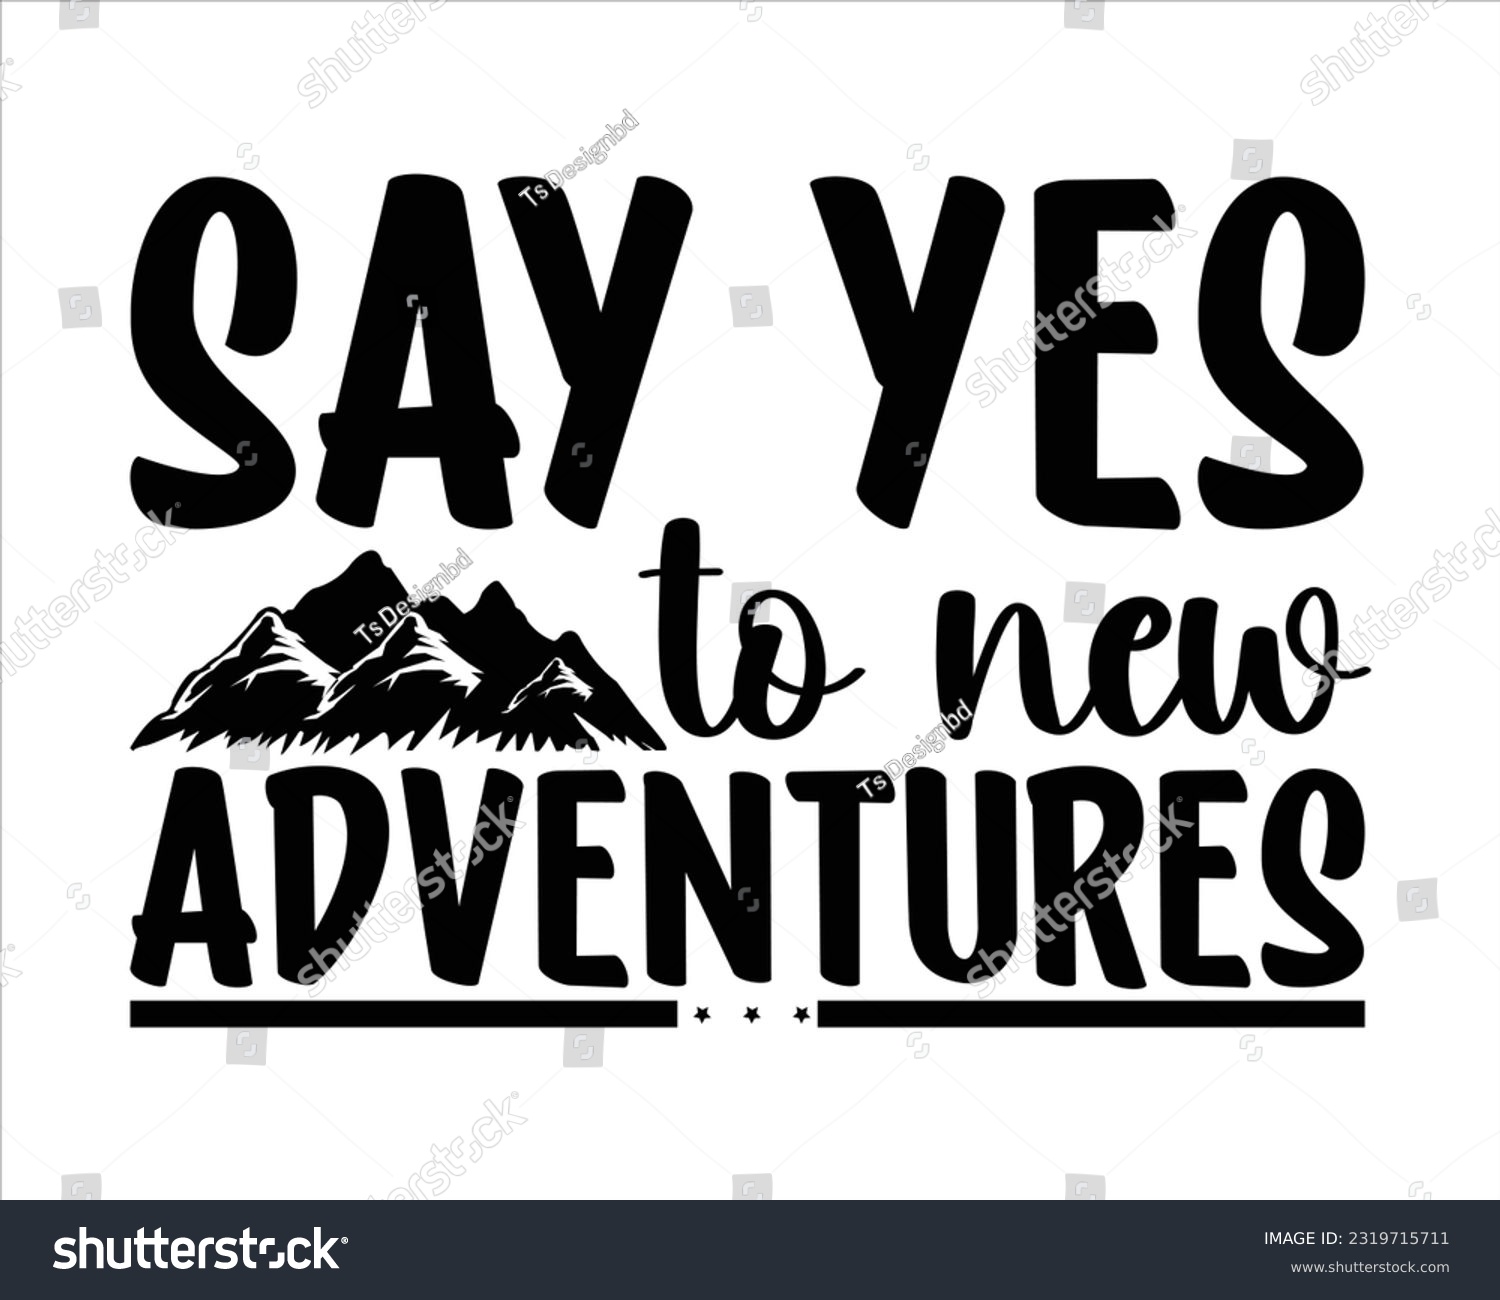 SVG of Say Yes To New Adventures Svg Design, Hiking Svg Design, Mountain illustration, outdoor adventure ,Outdoor Adventure Inspiring Motivation Quote, camping, hiking svg